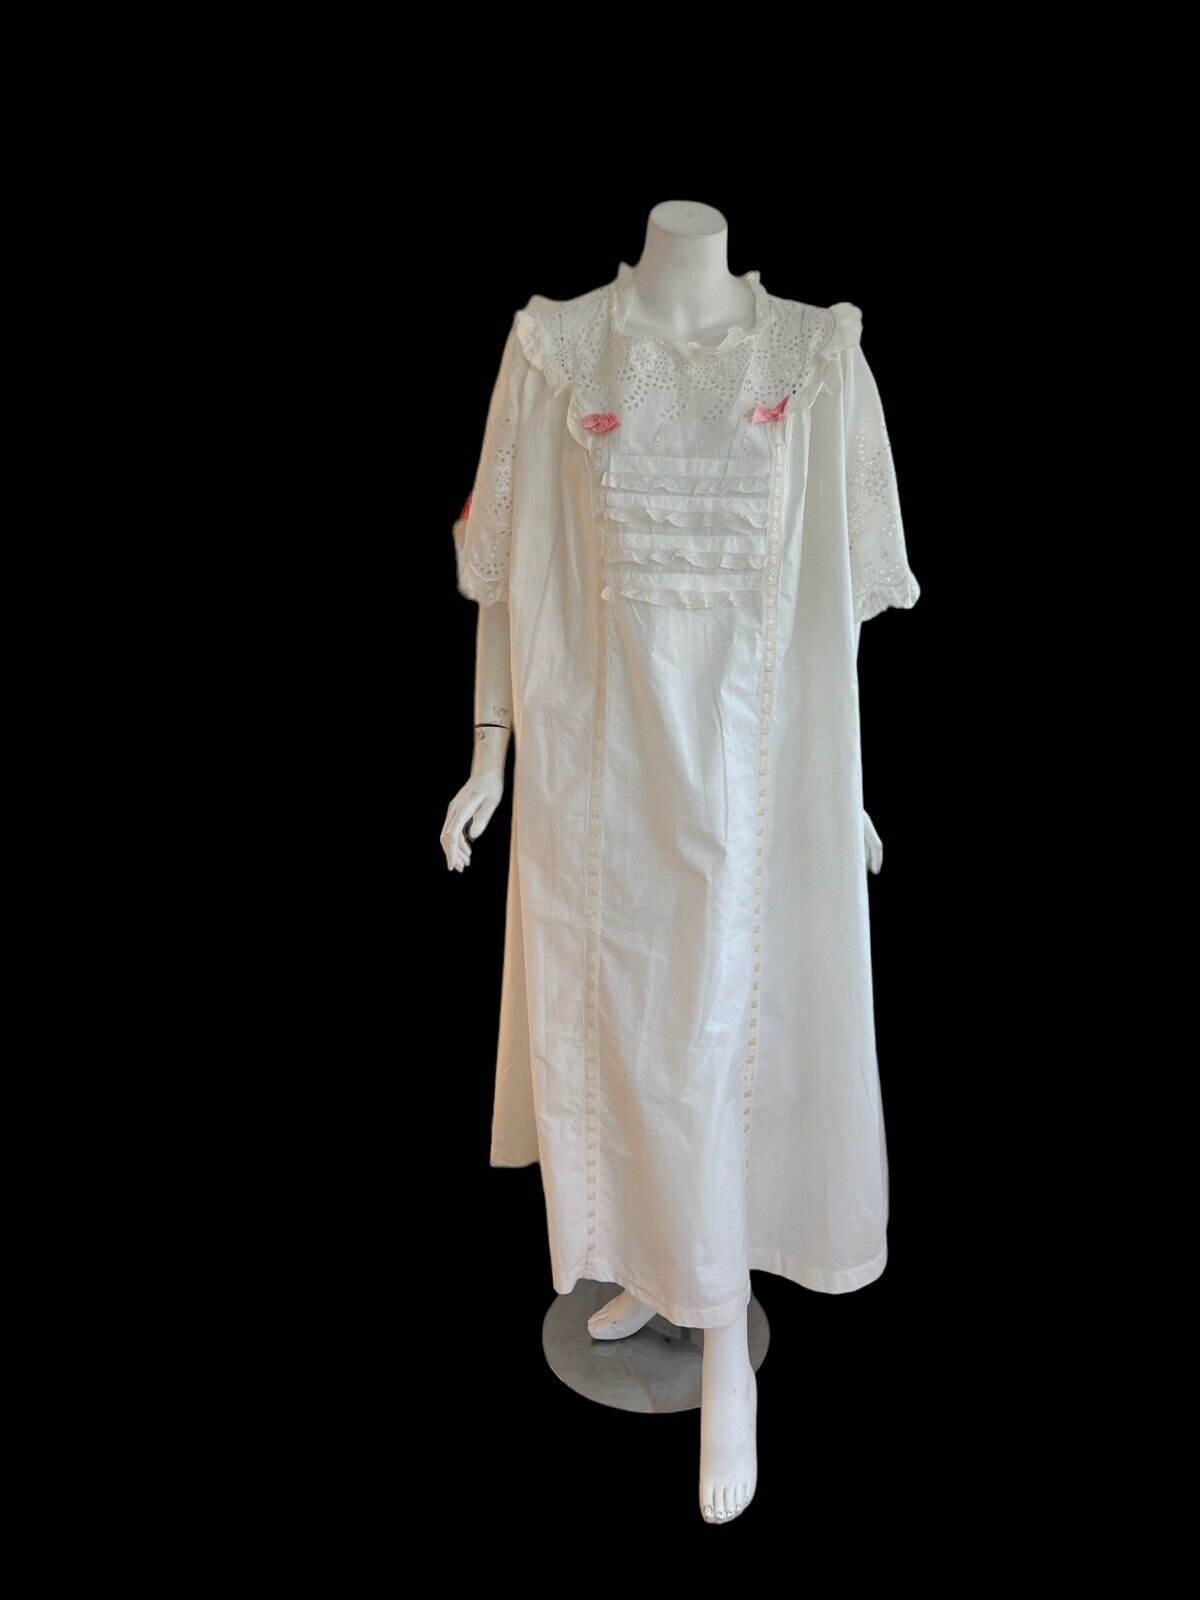 ANTIQUE CLOTHING- CIRCA 19THC LADIES BRODERIE ANGLAIS NIGHTGOWN W/RIBBONS